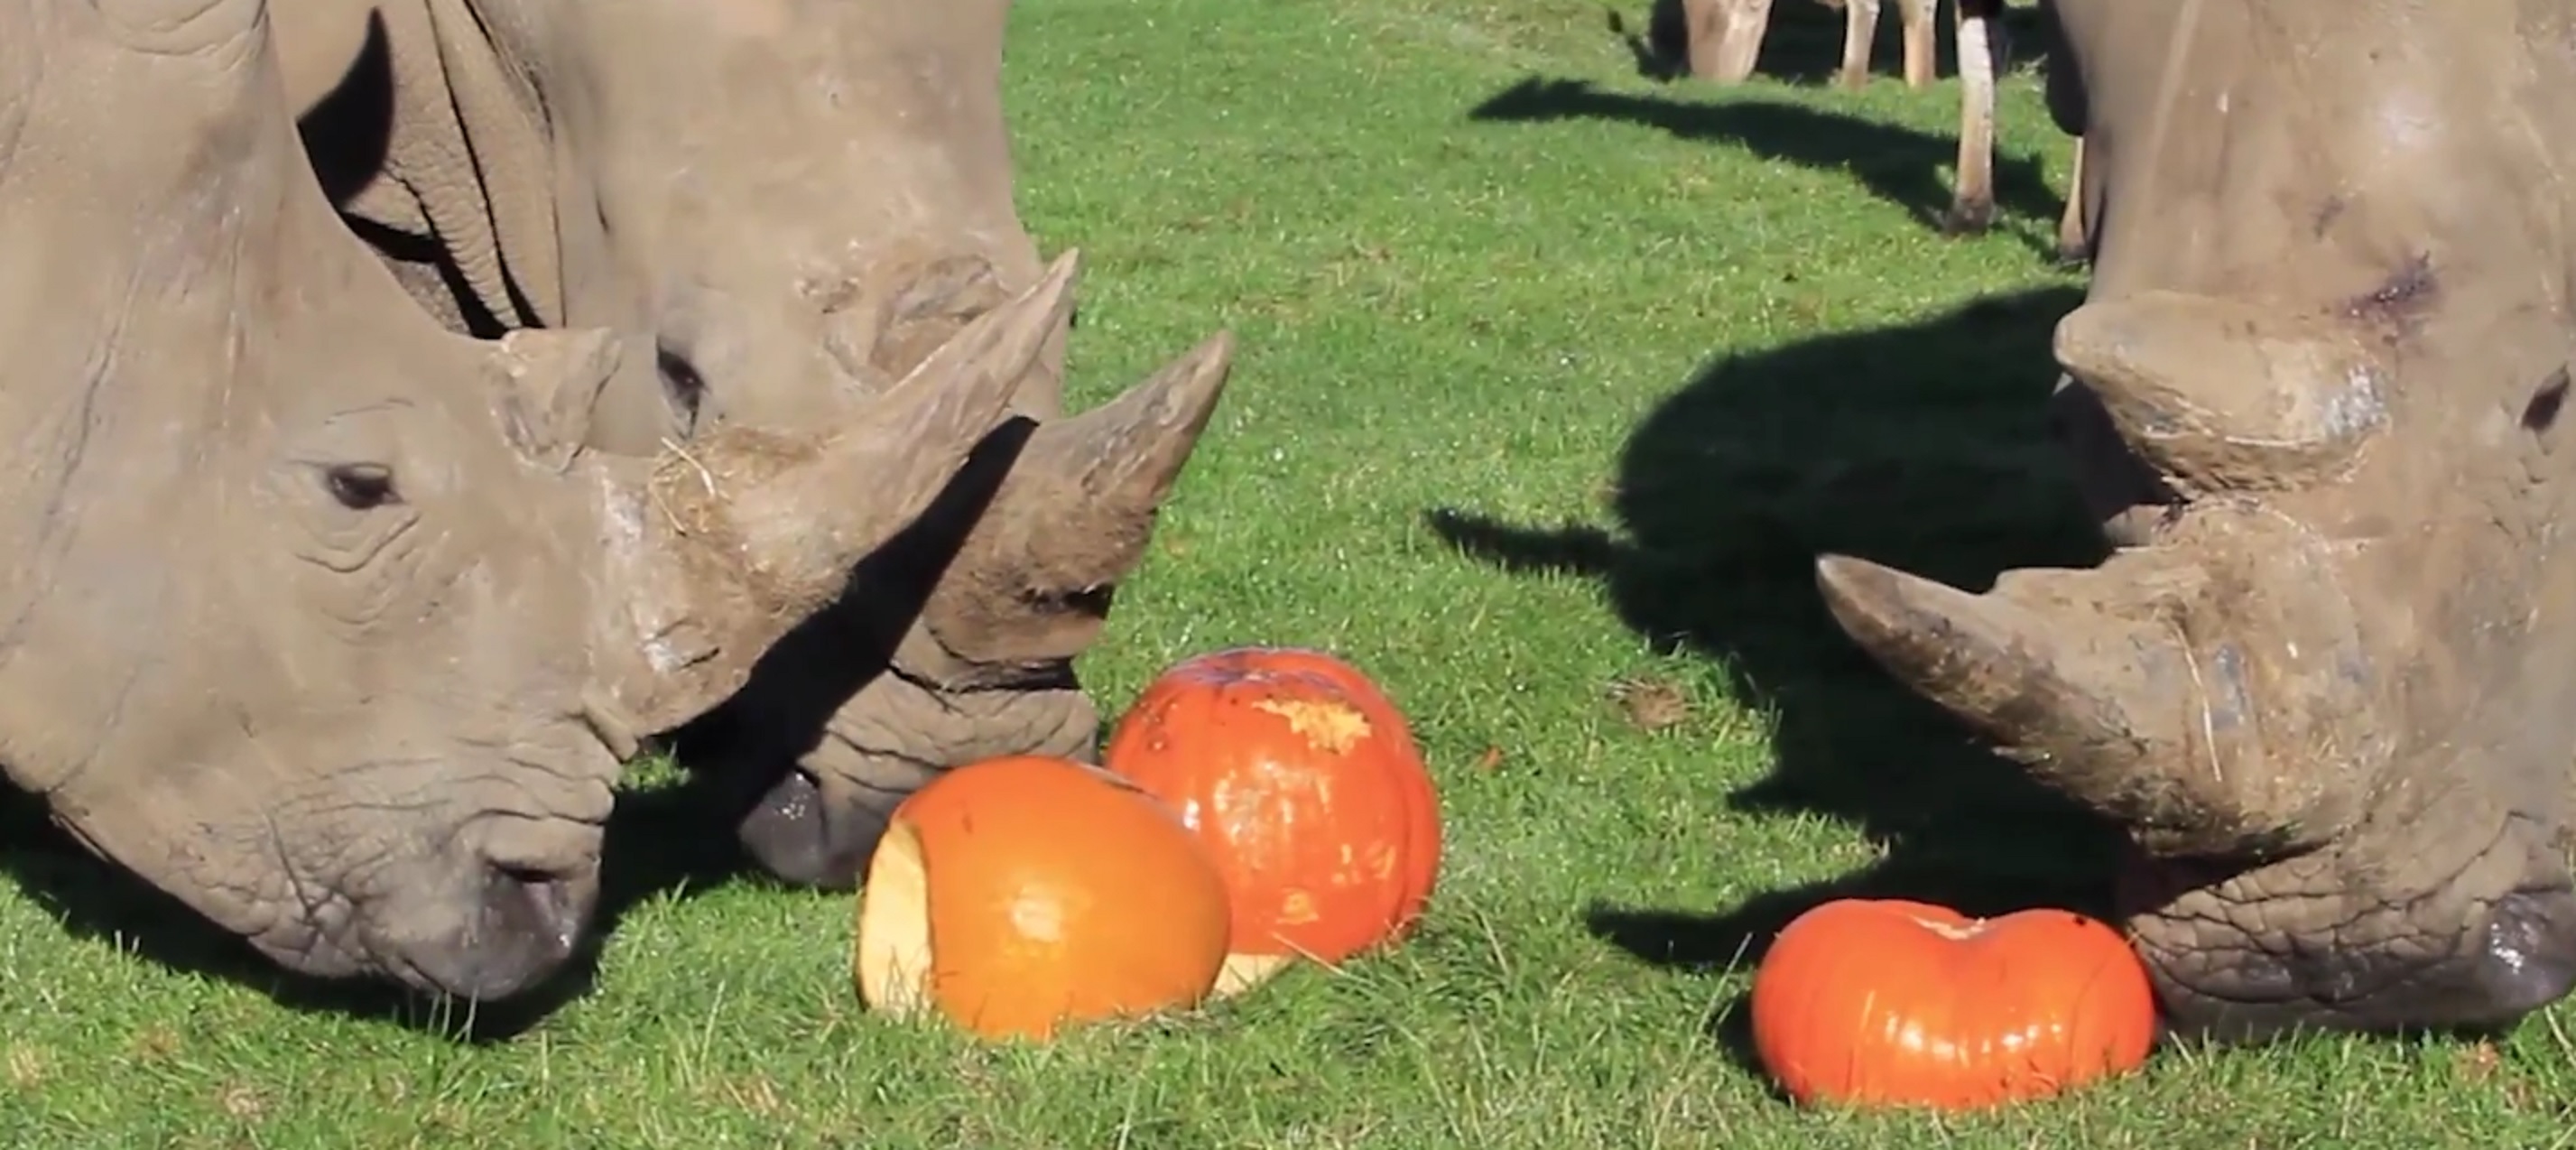 Rhinos take a look at the pumpkins in front of them